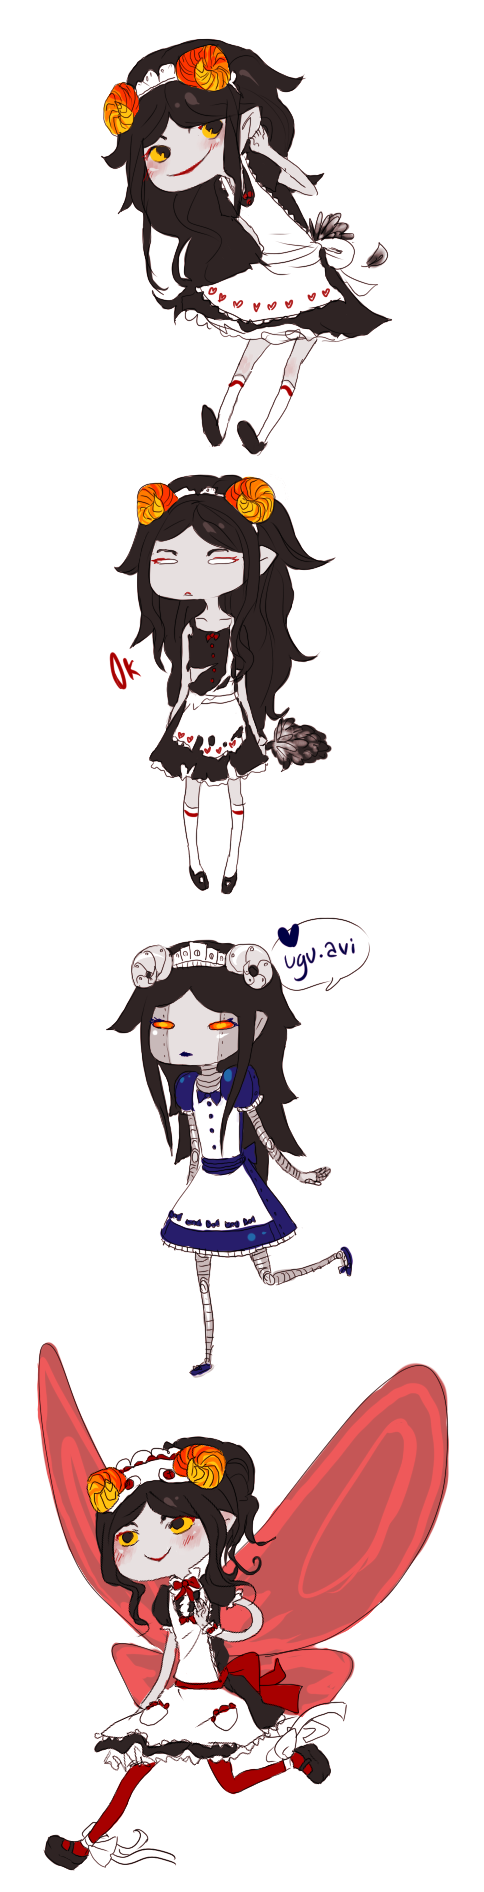 2011 aradia_megido aradiabot dead_aradia fashion godtier maid multiple_personas poisonparfait robot saucy_maid_outfit text wings_only word_balloon